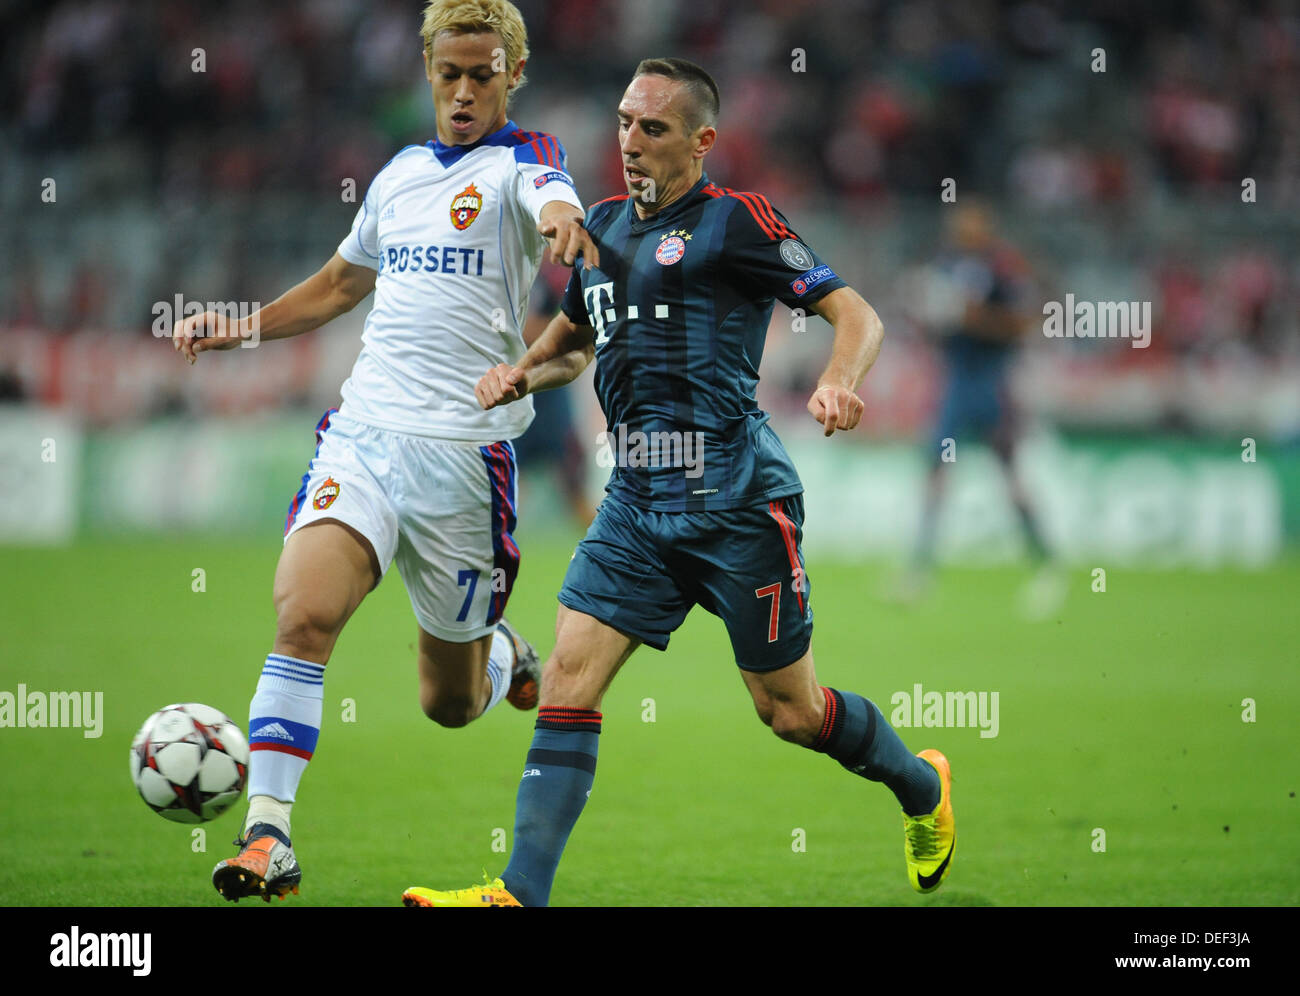 Munich's Franck Ribery (R) and Moscow's Keisuke Honda vie for the ball during the UEFA Champions League Group D soccer match between FC Bayern Munich and CSKA Moscow at München Arena in Munich, Germany, 17 September 2013. Photo: Andreas Gebert/dpa Stock Photo